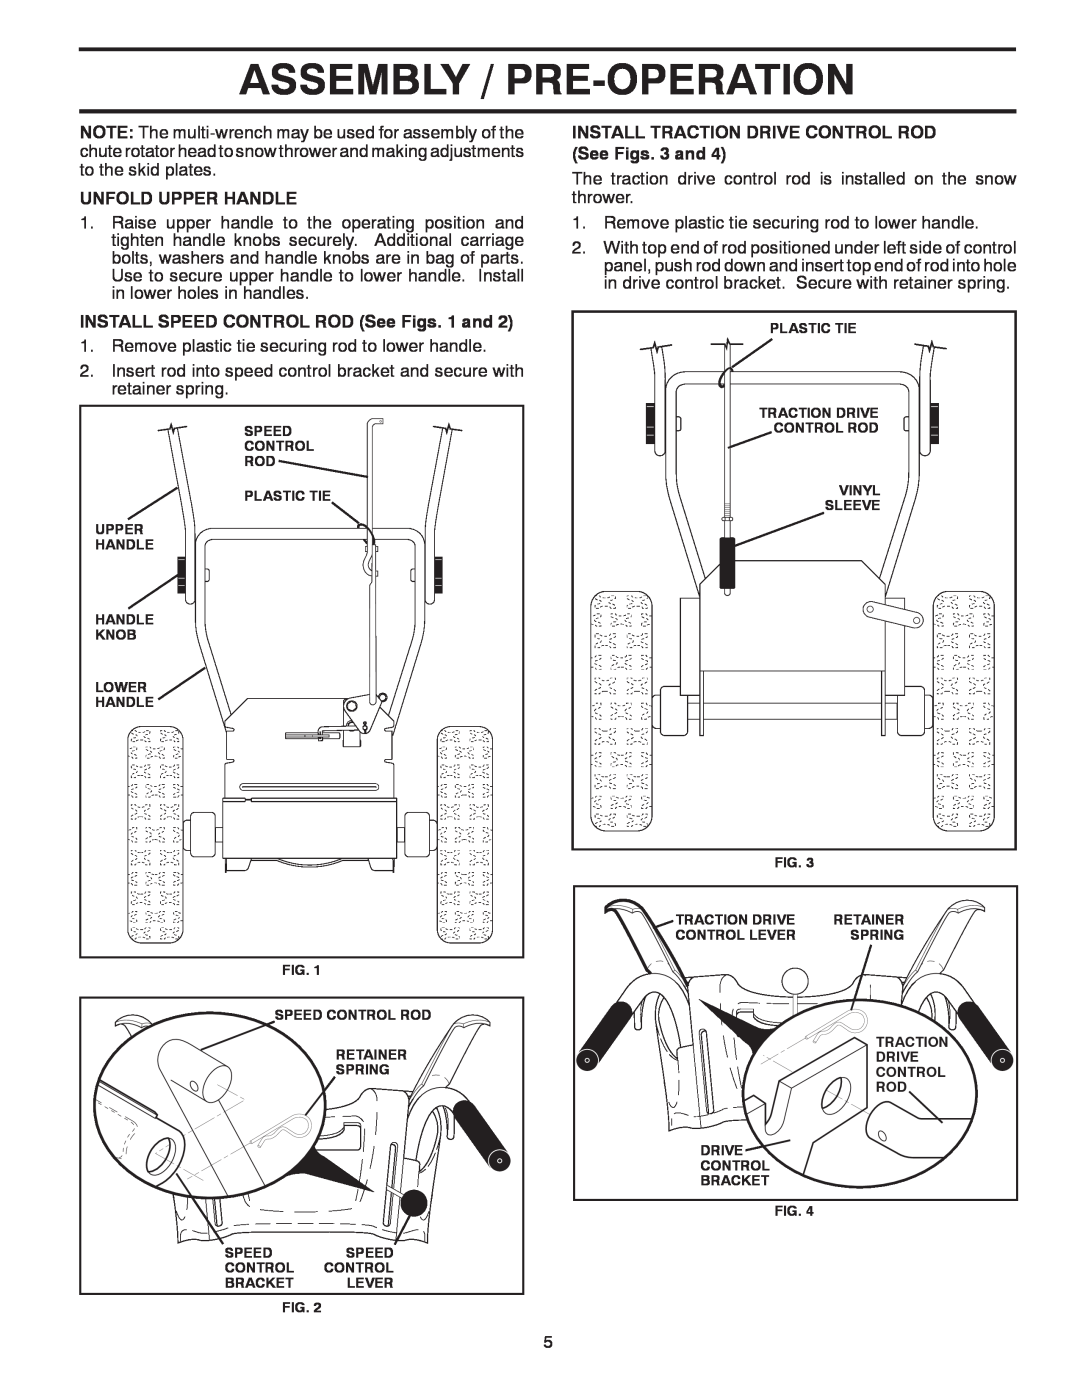 McCulloch 96192004101 owner manual Assembly / Pre-Operation, Unfold Upper Handle, INSTALL SPEED CONTROL ROD See Figs. 1 and 